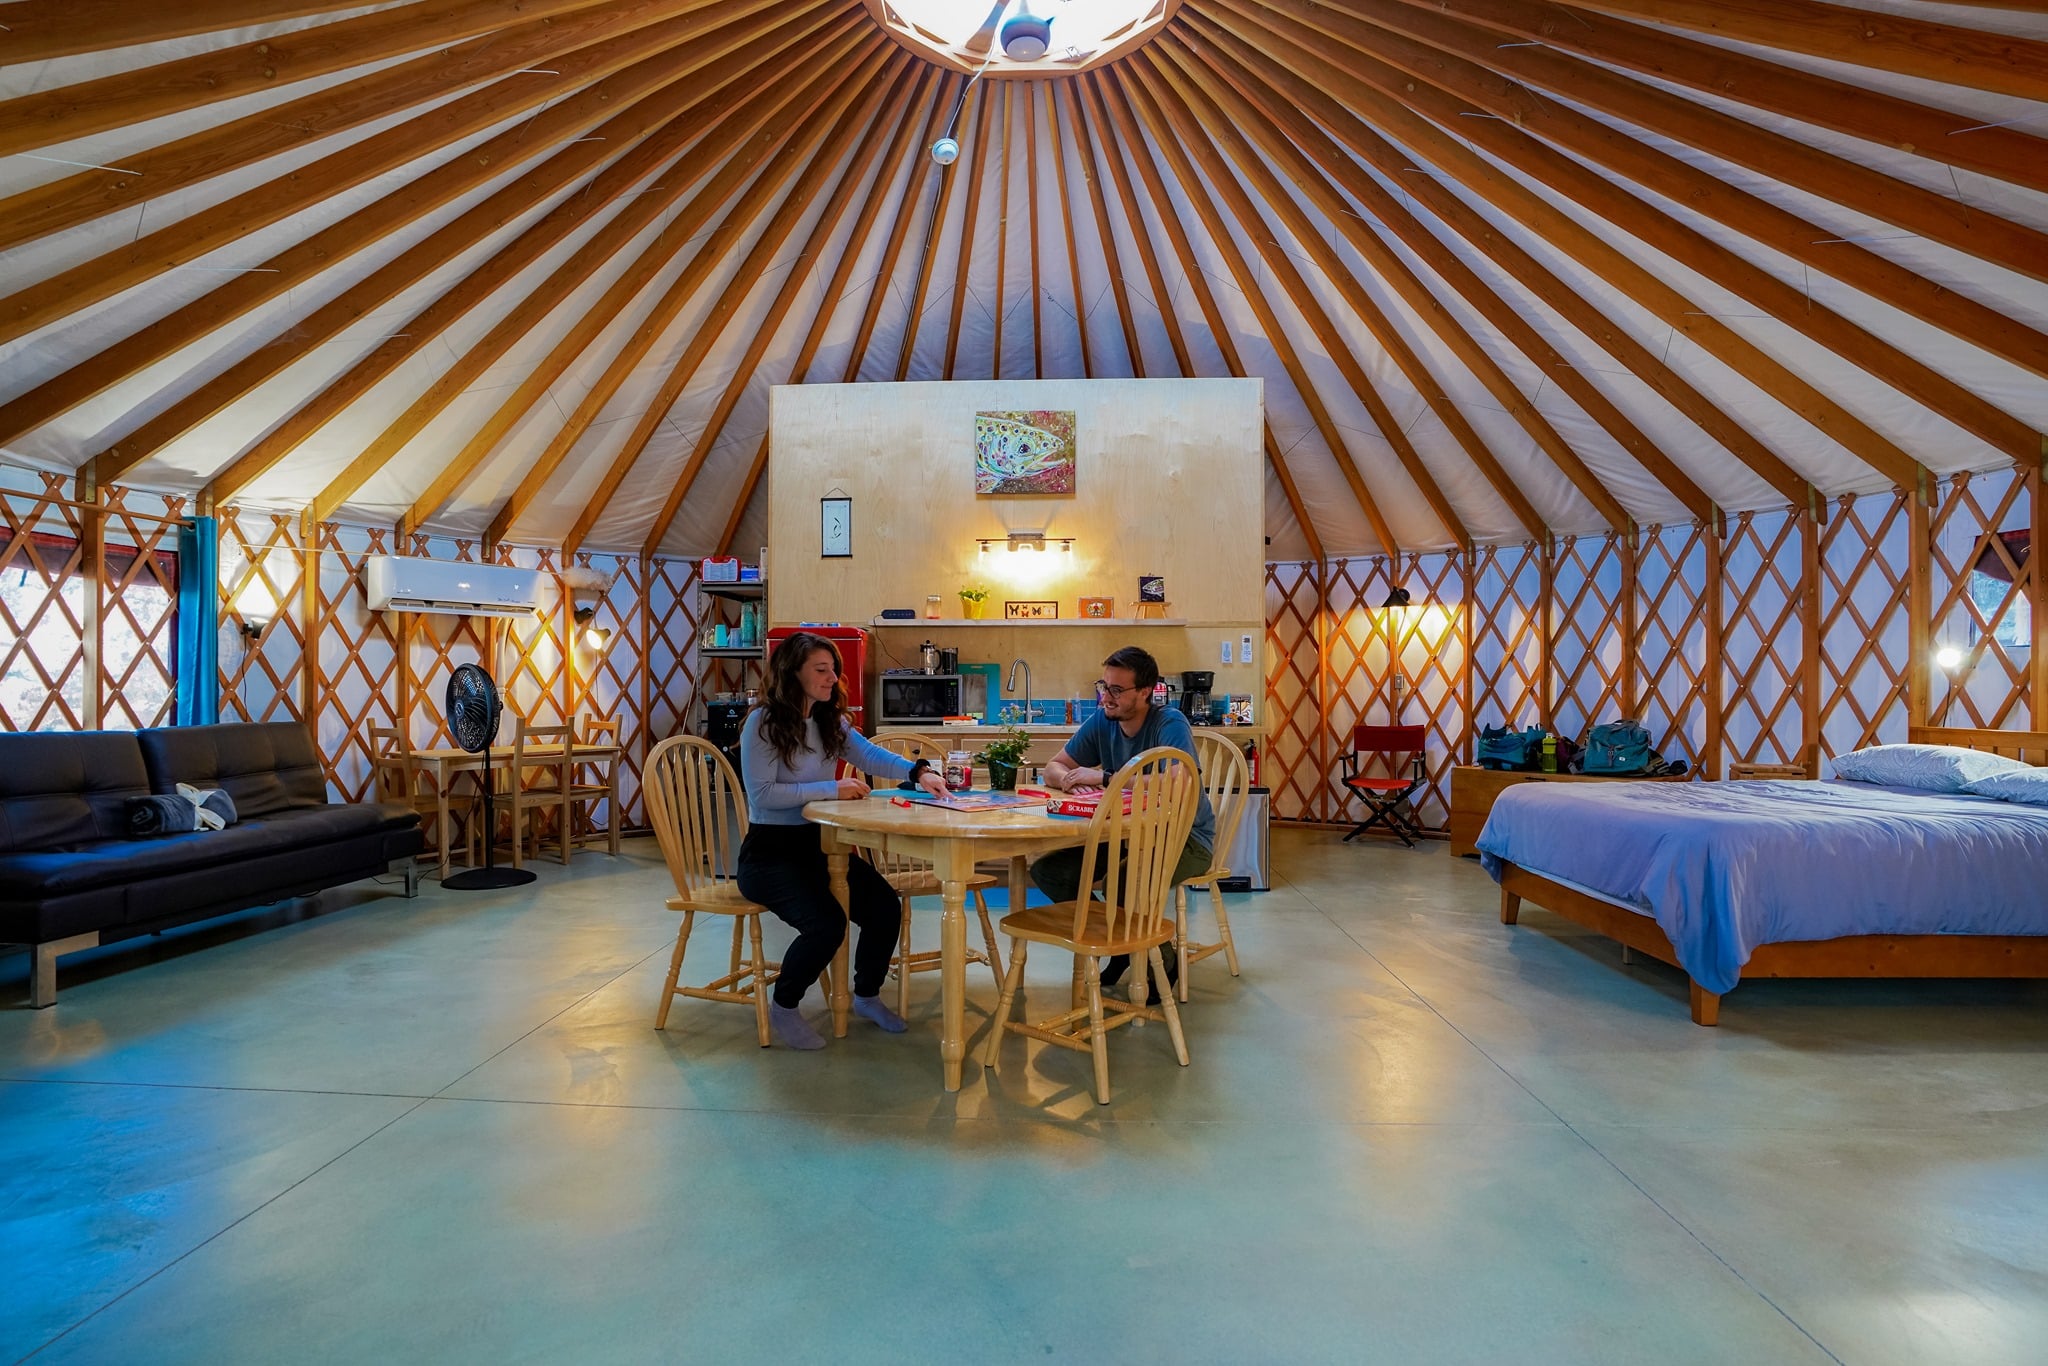 Two people sit playing a board game at a wooden table in the middle of a large, well-decorated yurt.